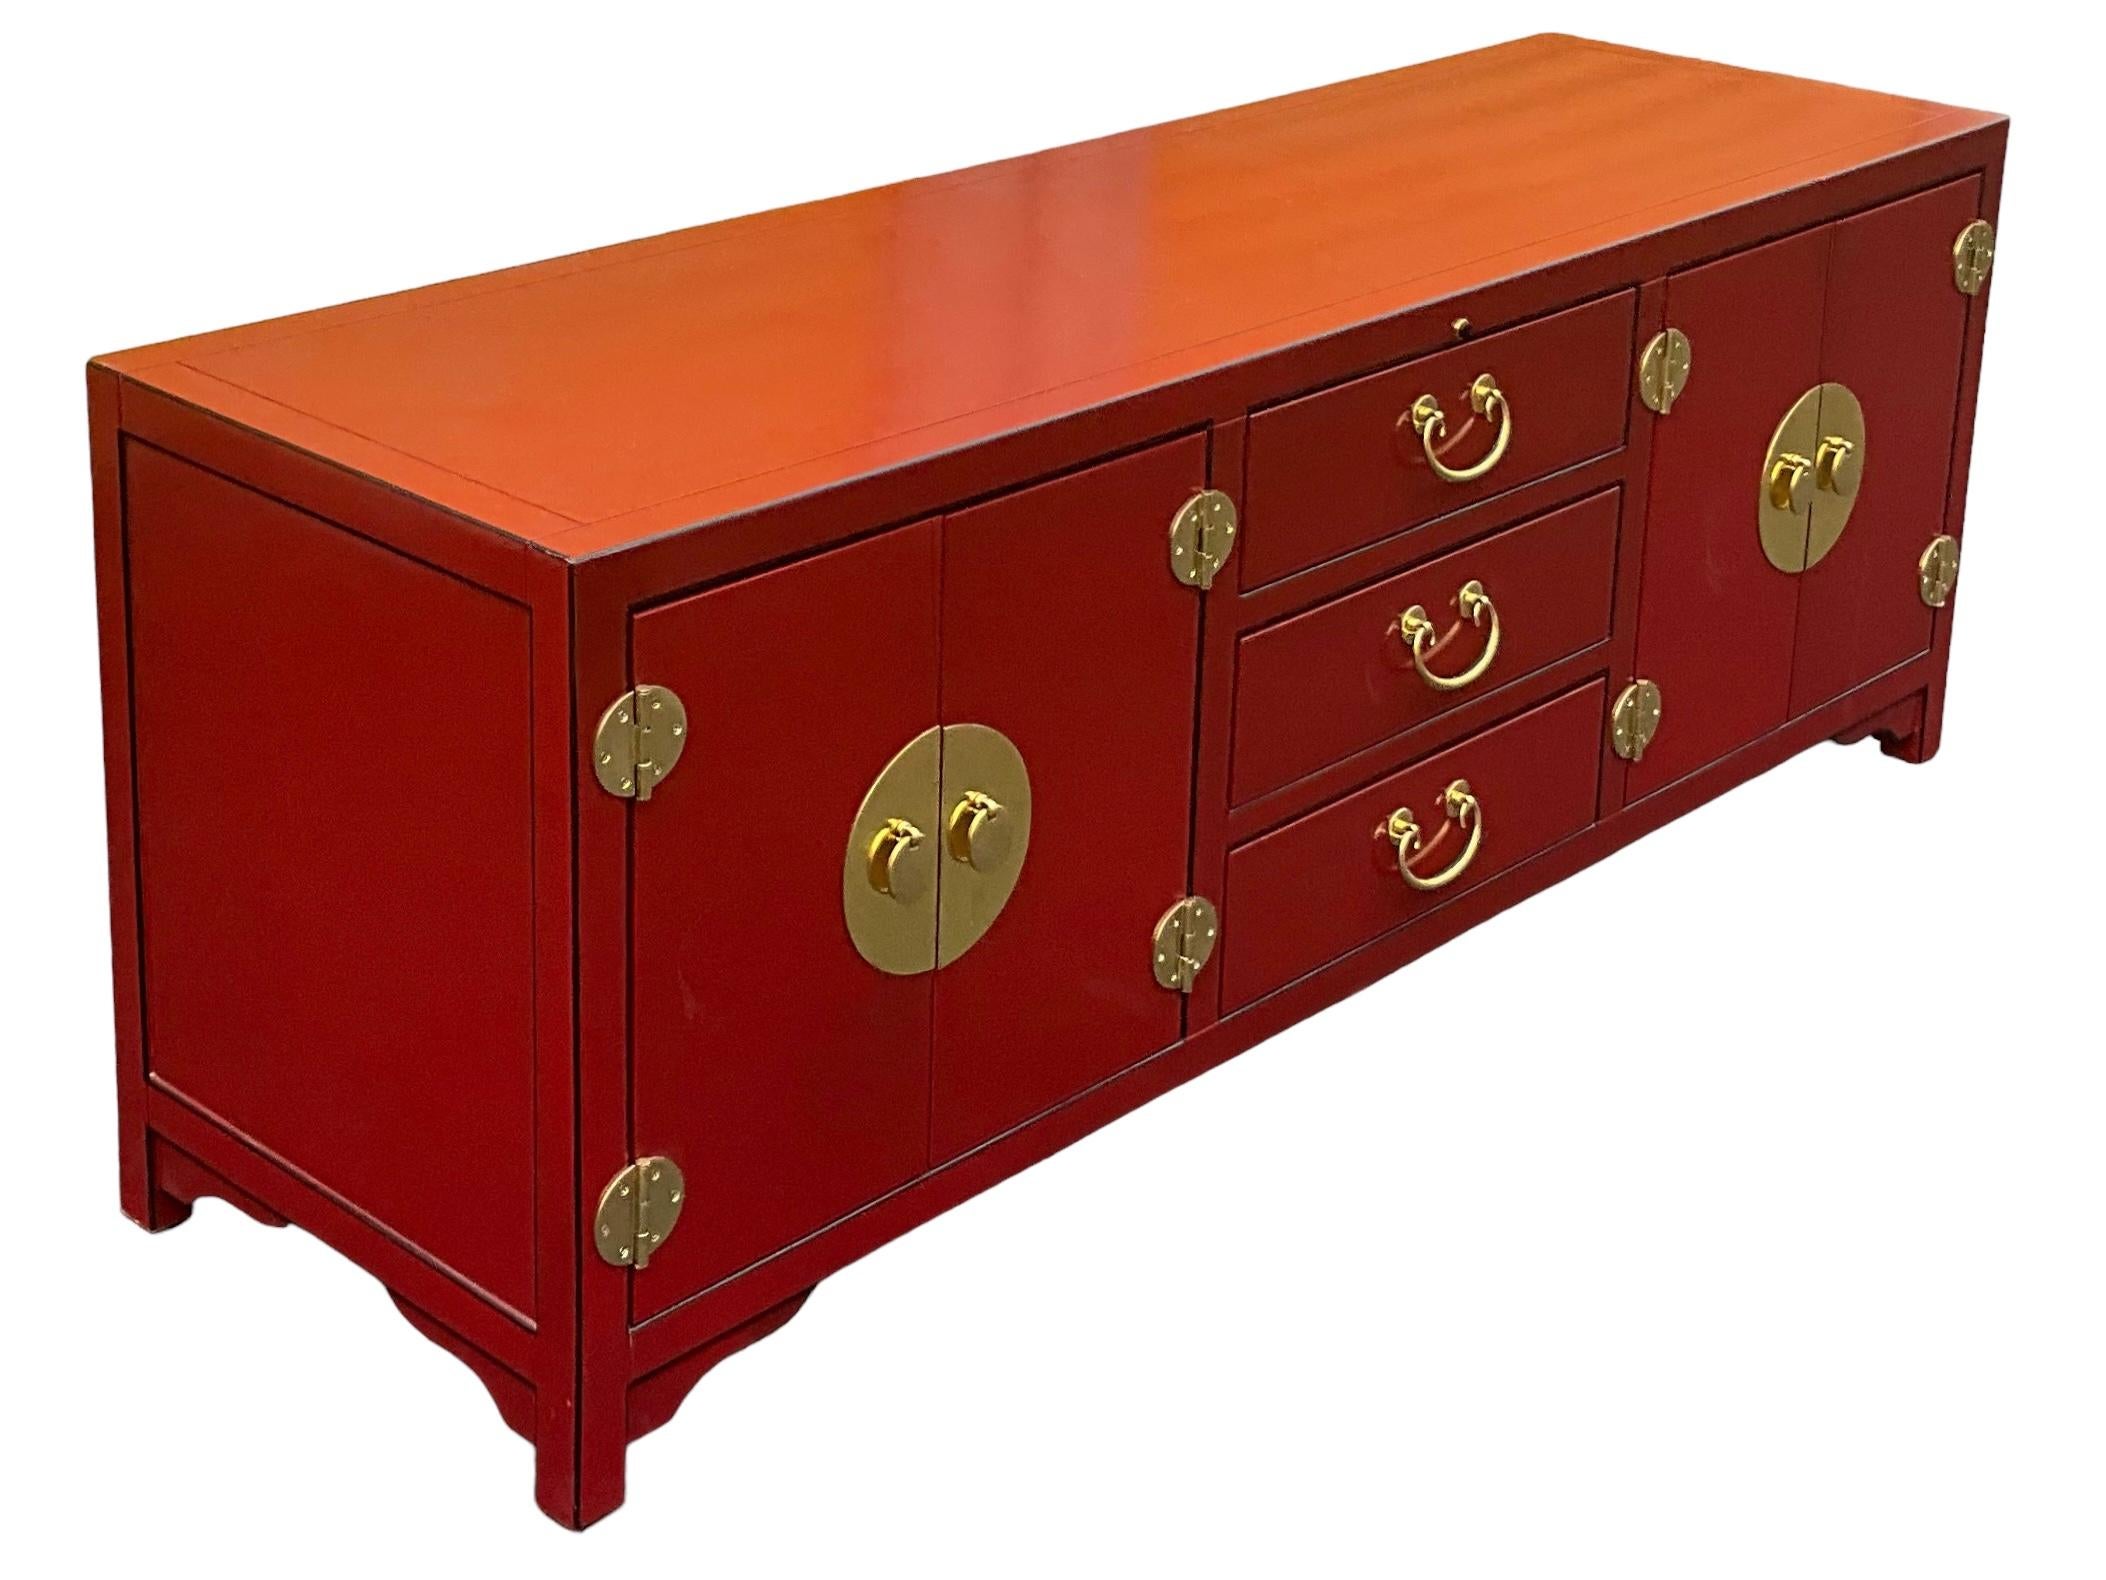 Late 20th-C. Ming Style Red Lacquer & Brass Credenza / Media Cabinet By Sligh  In Good Condition For Sale In Kennesaw, GA